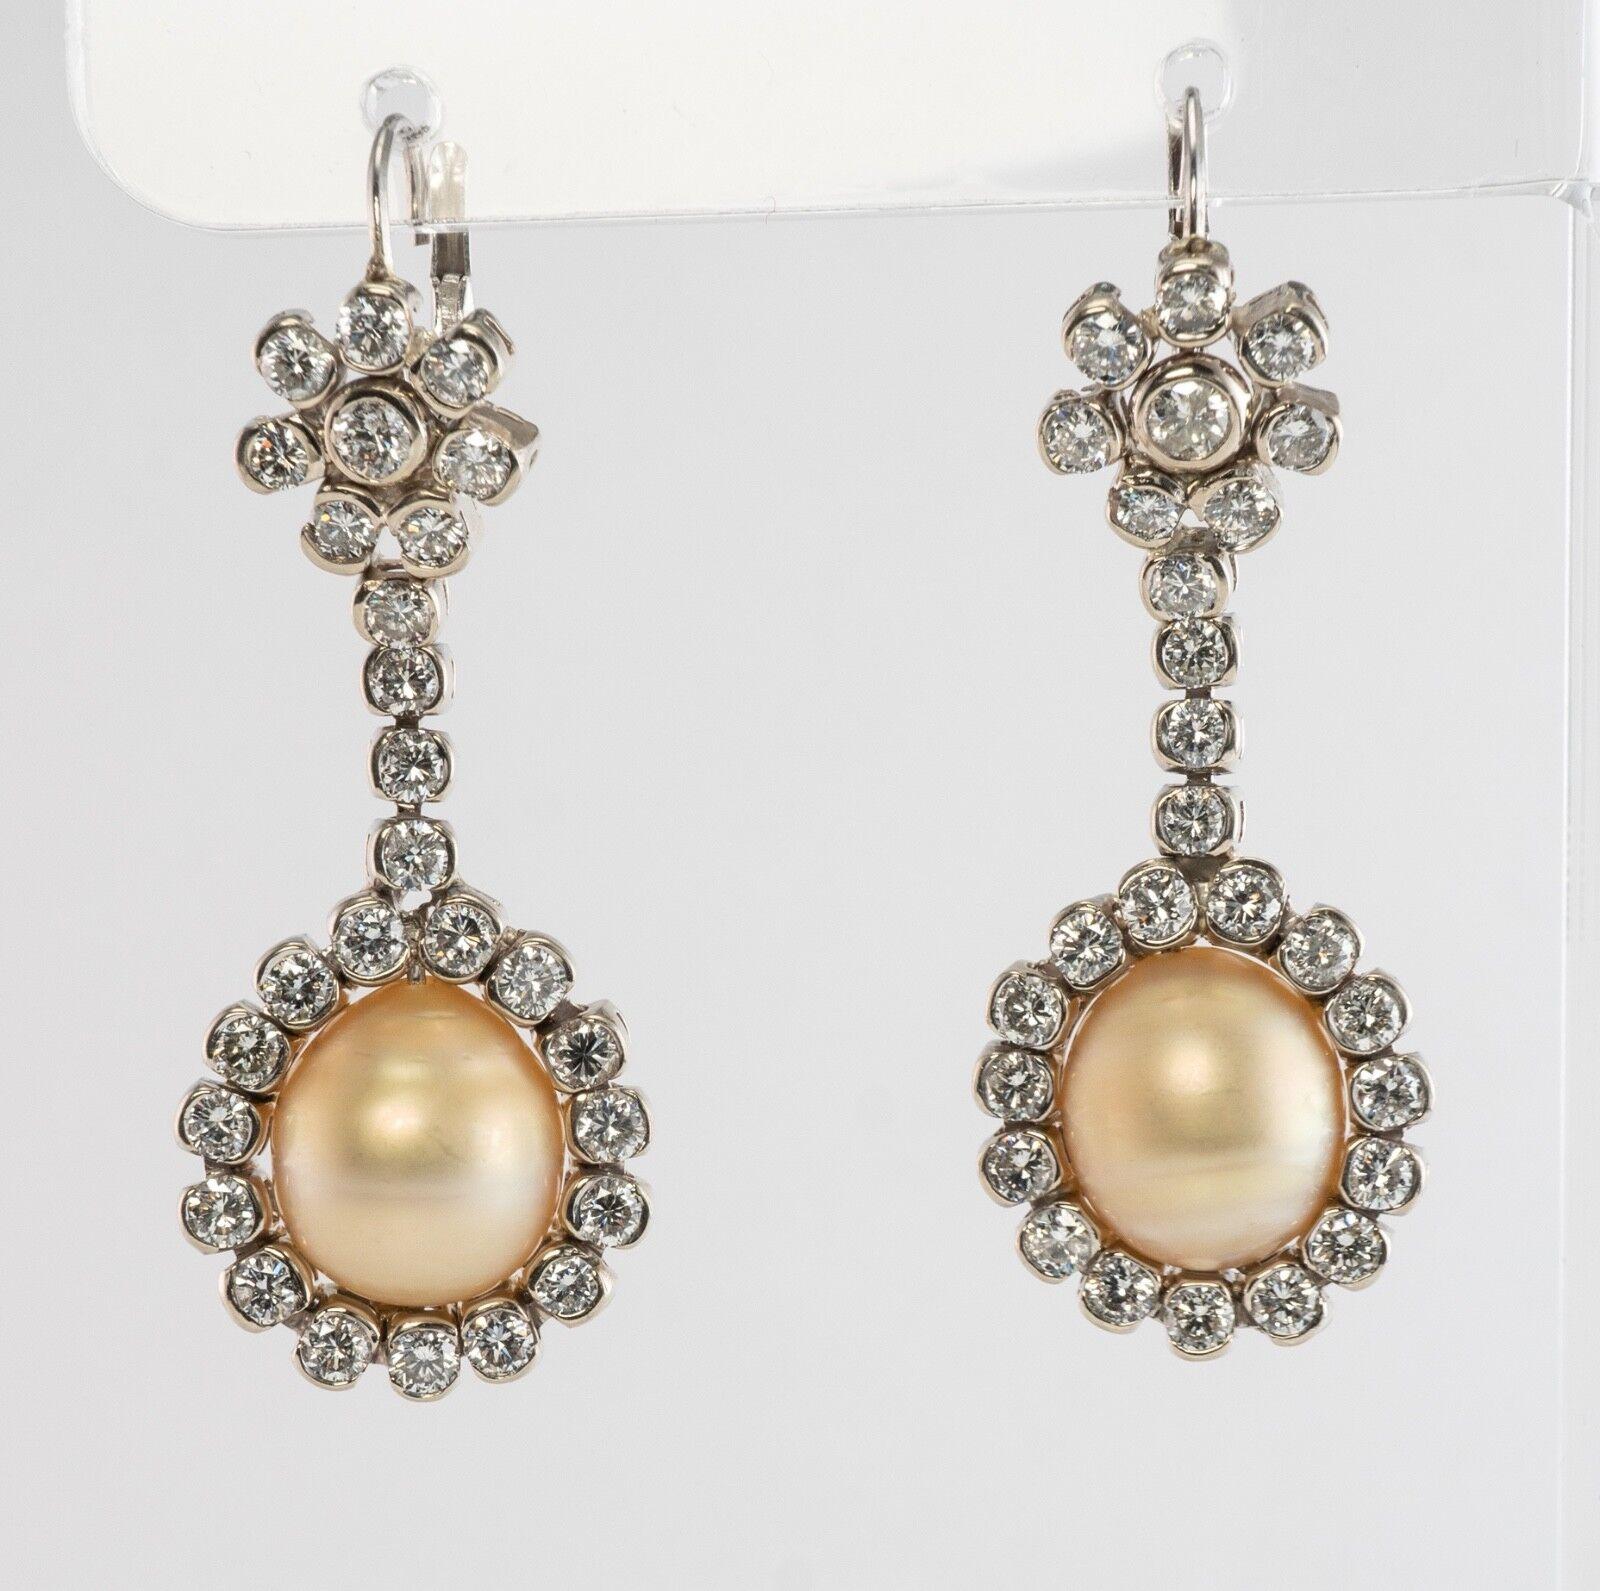 This absolutely stunning pair of earrings is finely crafted in solid 14K White Gold. Each cultured natural South Sea Pearl measures 12mm x 11mm. These quality Pearls with light golden undertone has a great luster and skin. Each earring has 27 white